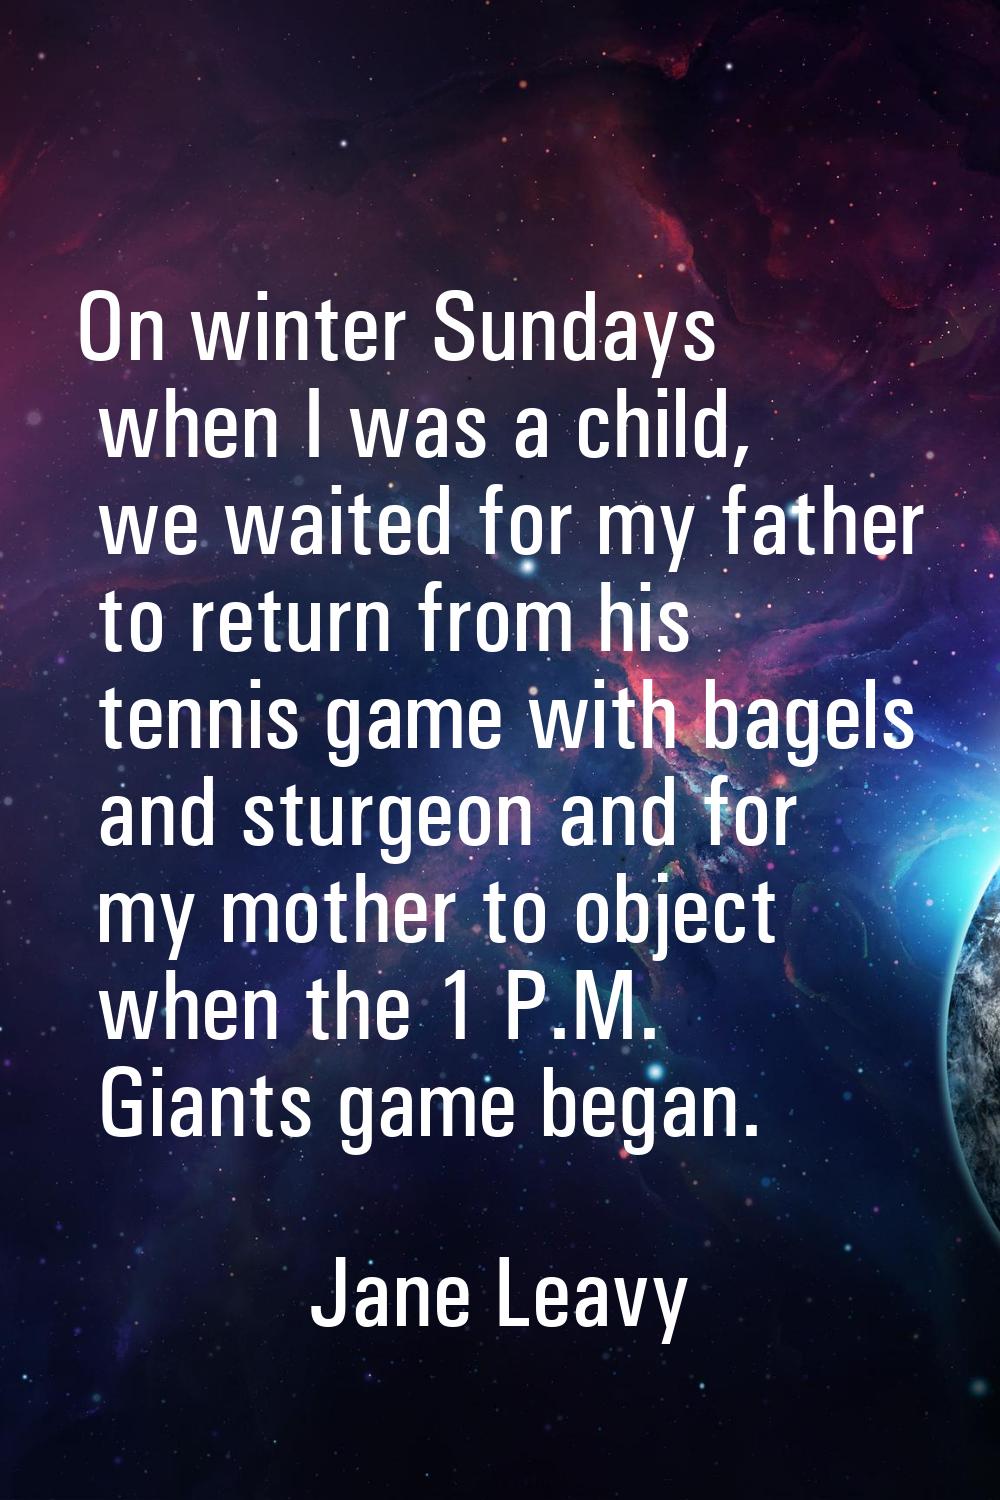 On winter Sundays when I was a child, we waited for my father to return from his tennis game with b